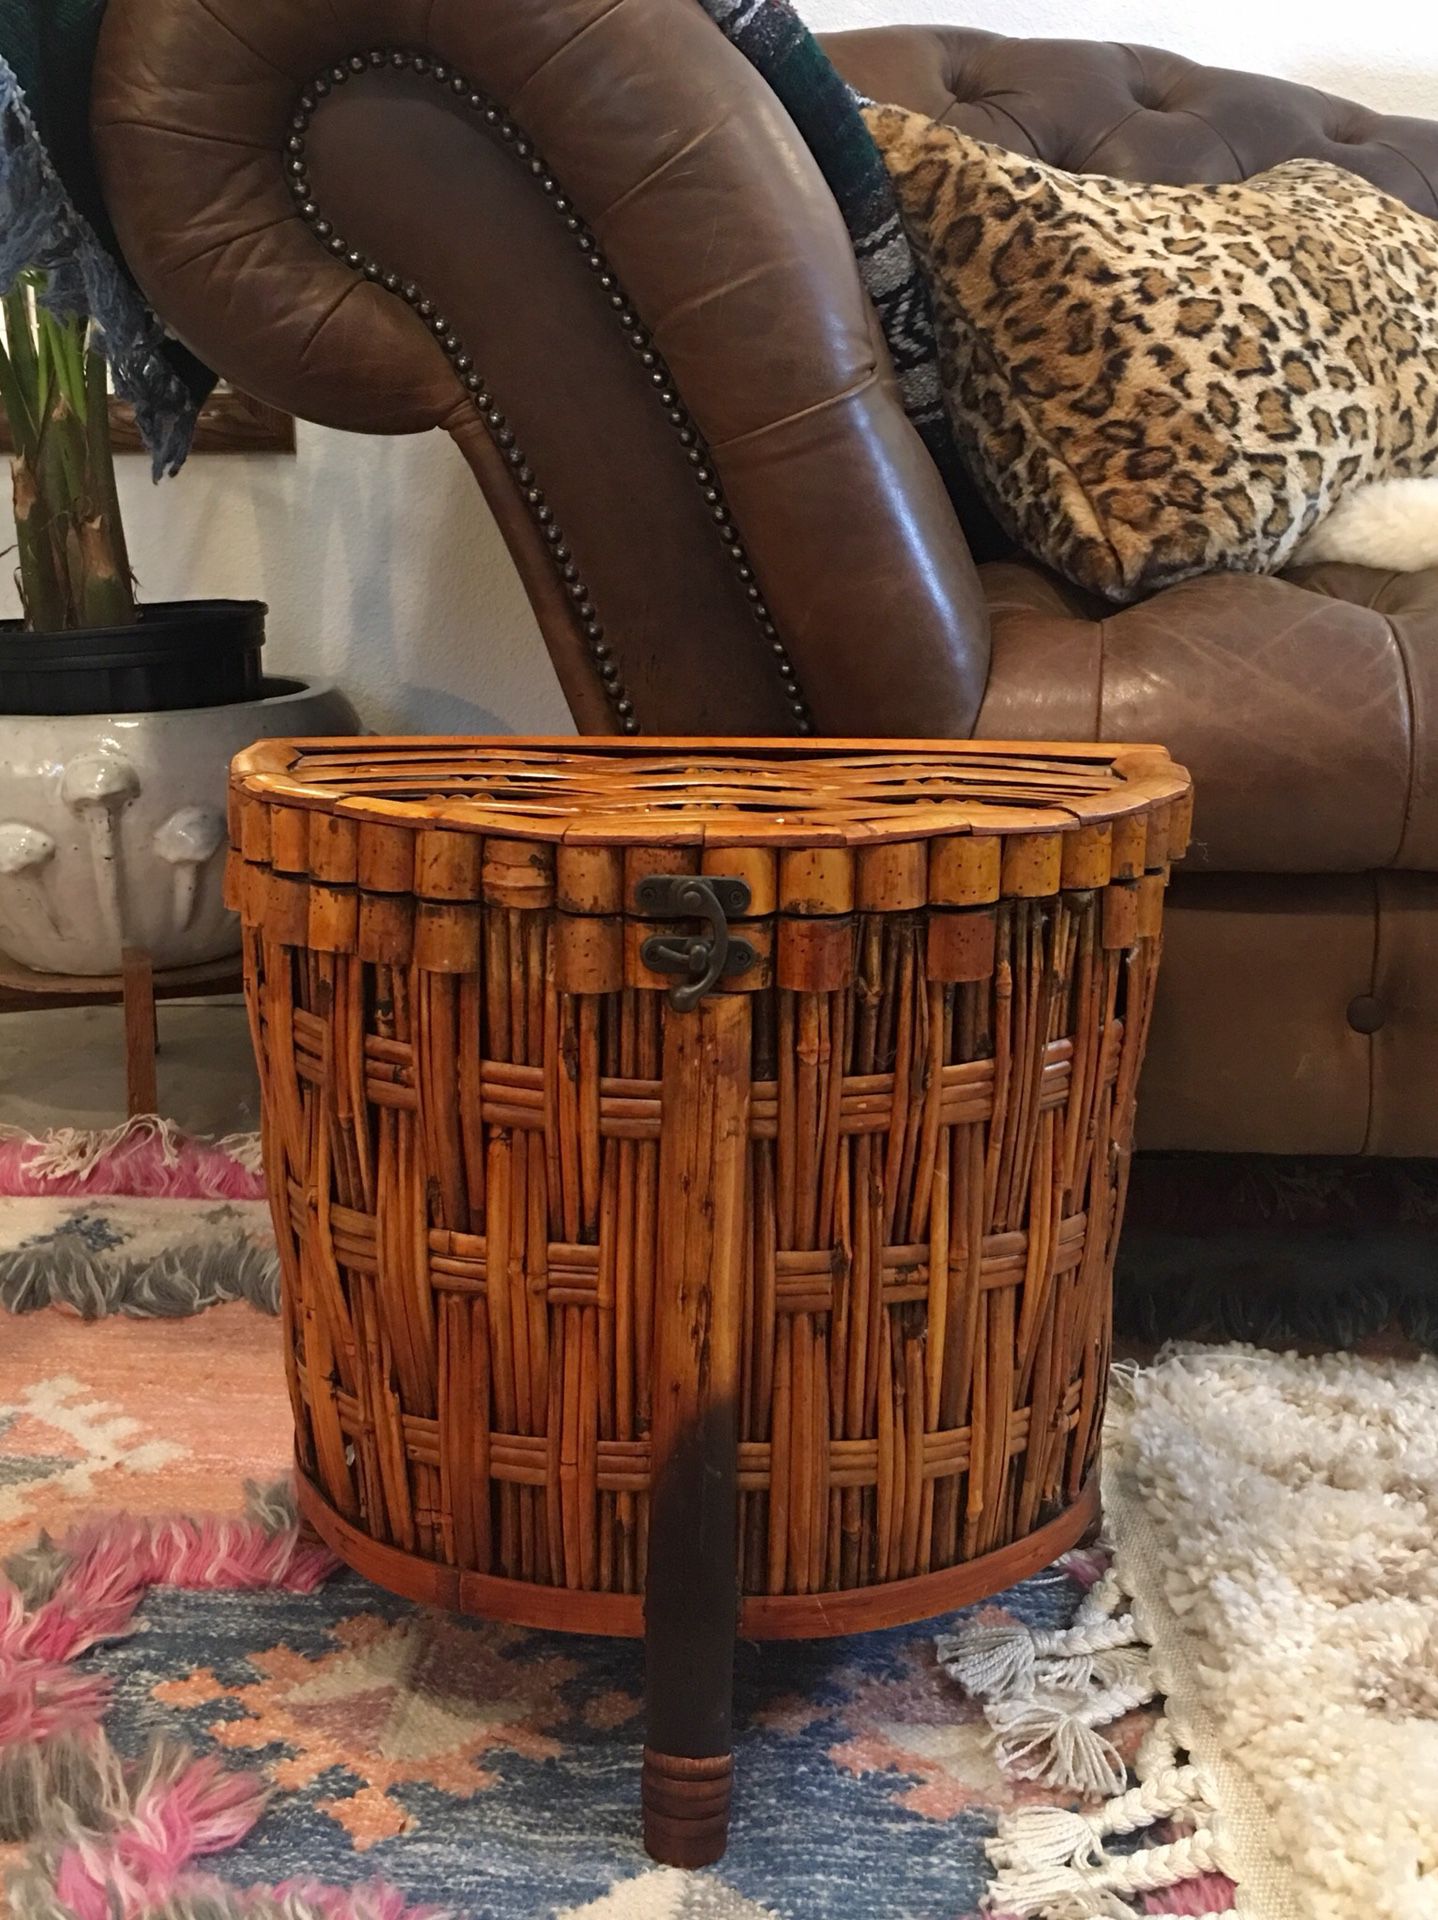 Bamboo Wicker Rattan Plant Stand With Storage Three Legged Side Table With Lid And Locking Clasp - Pick Up OC or LA